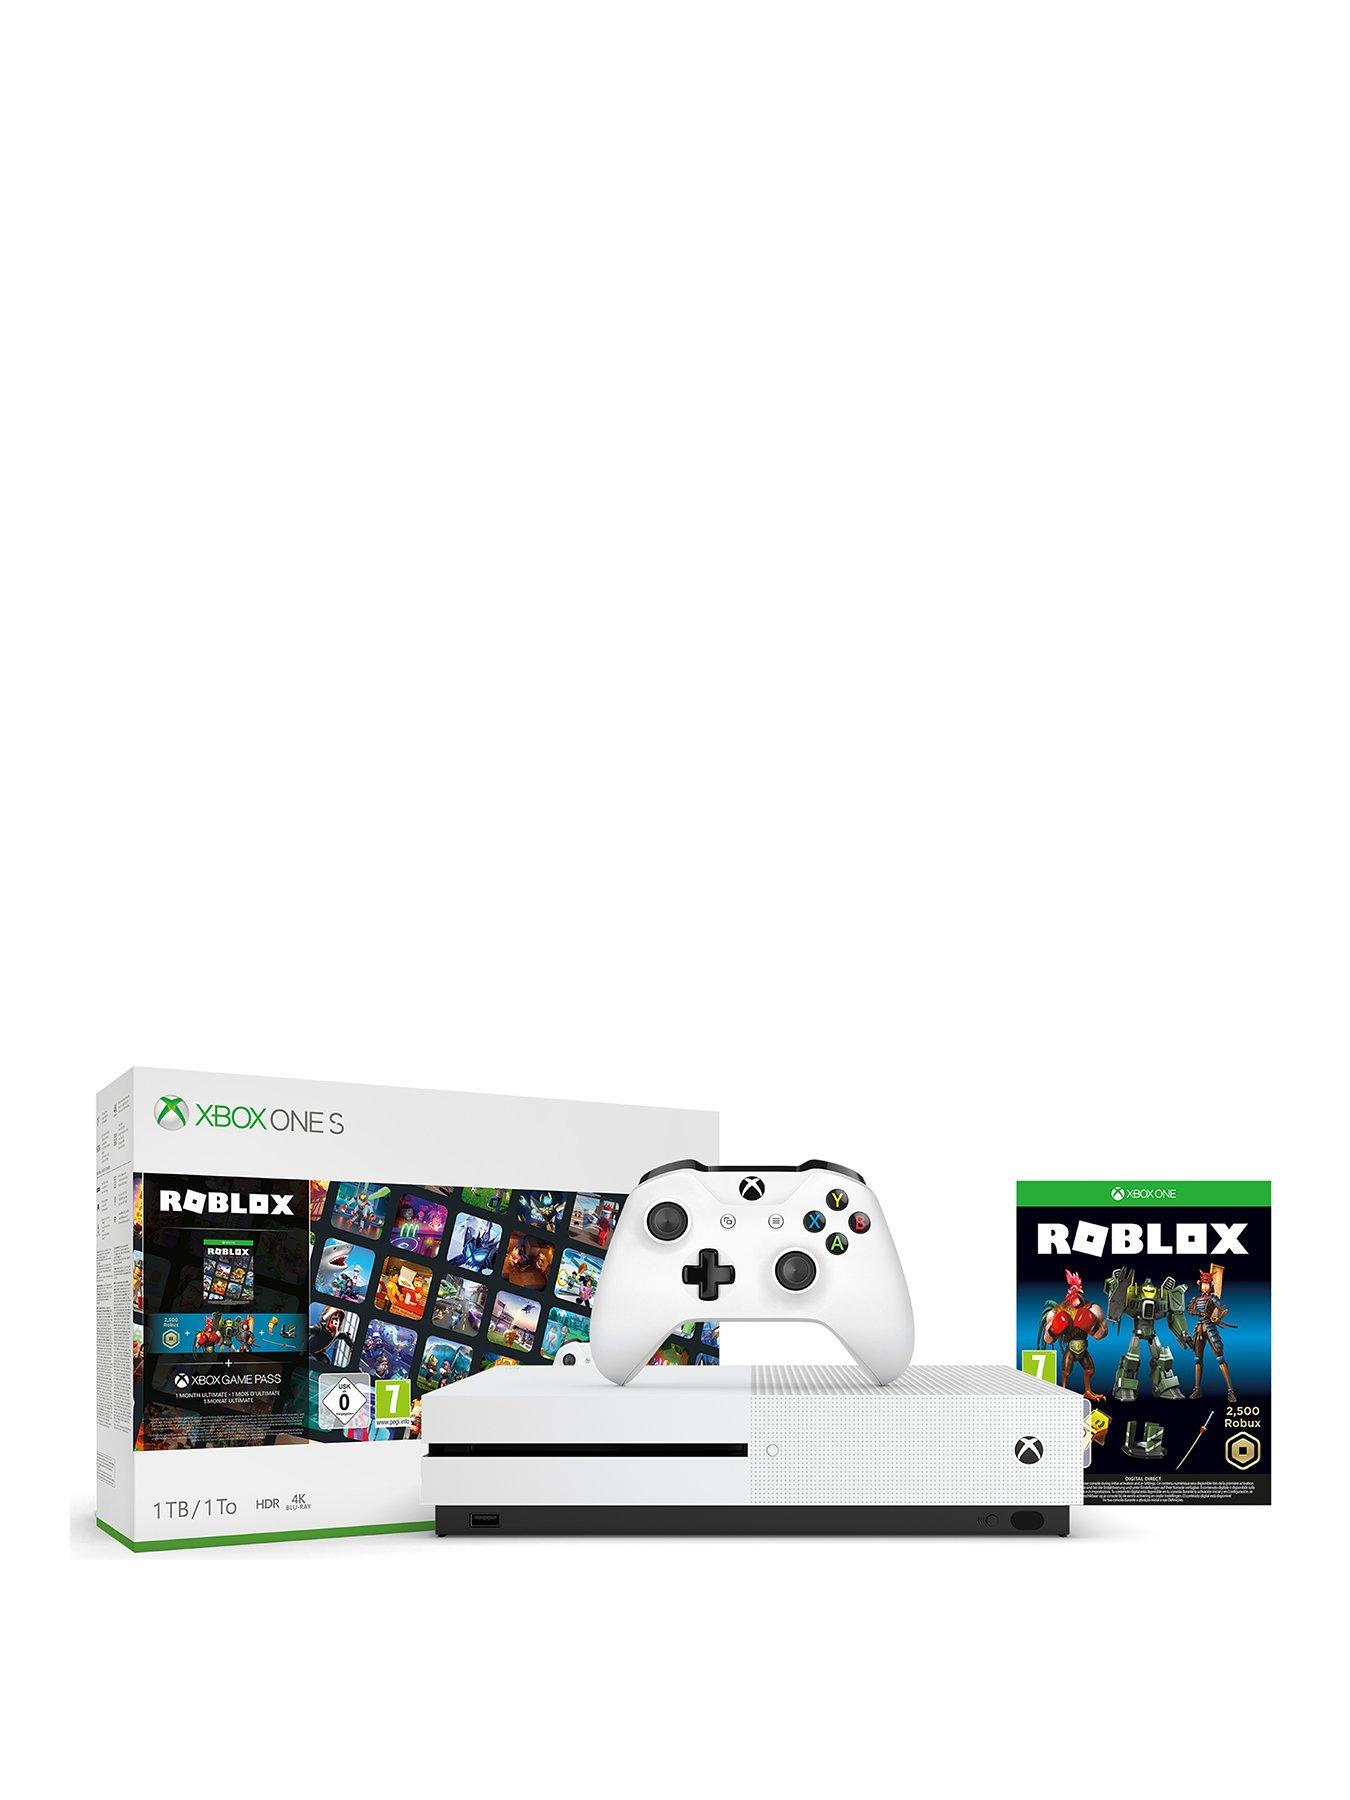 Xbox One S With Roblox Bundle And Optional Extras 1tb Console White Very Co Uk - roblox now available in uk xbox one uk